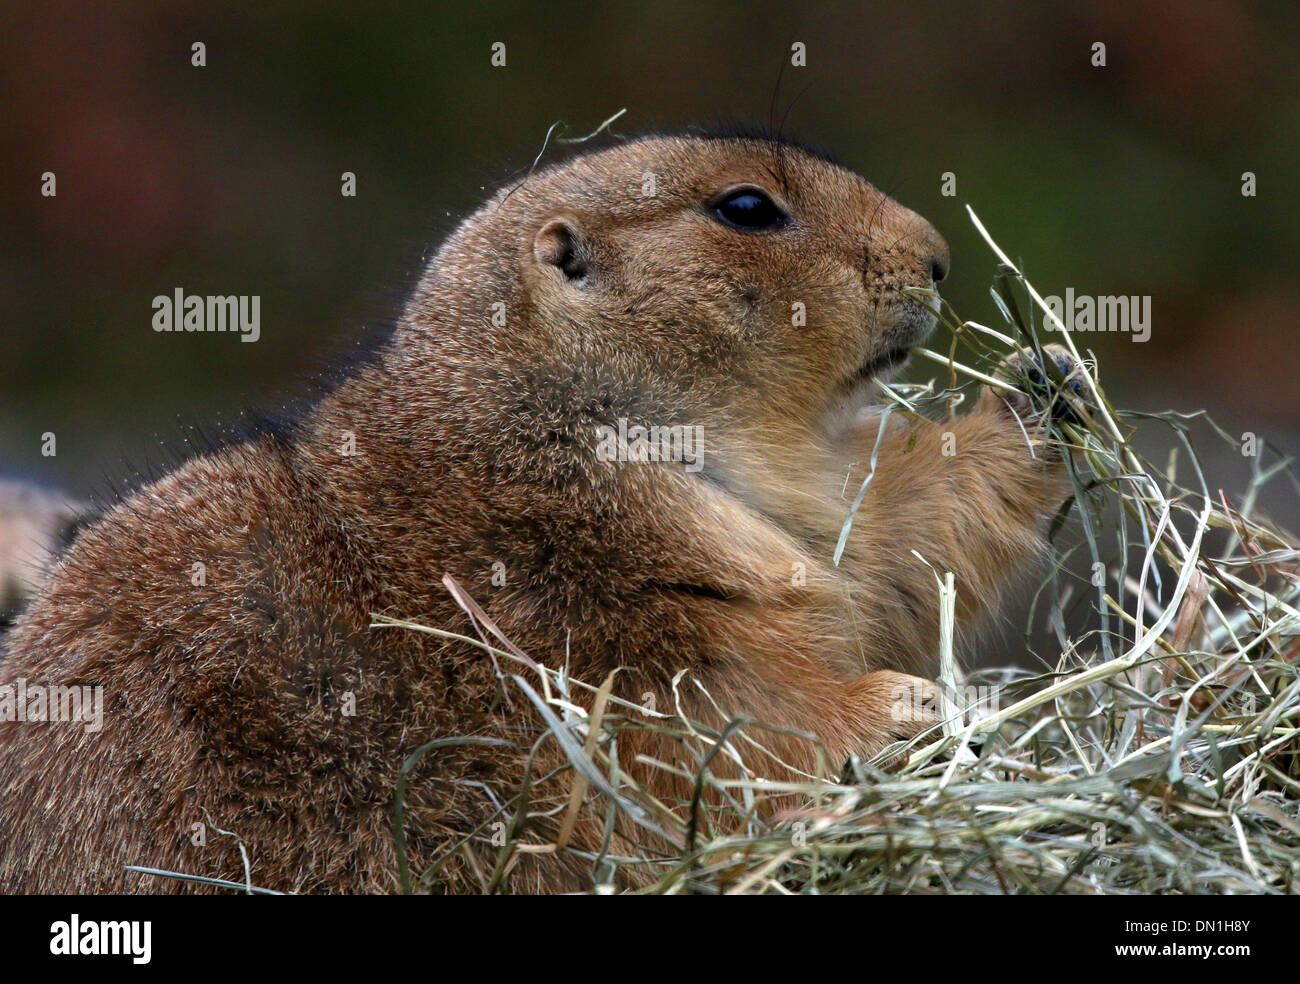 Black-tailed prairie dog (Cynomys ludovicianus) in a zoo setting Stock Photo